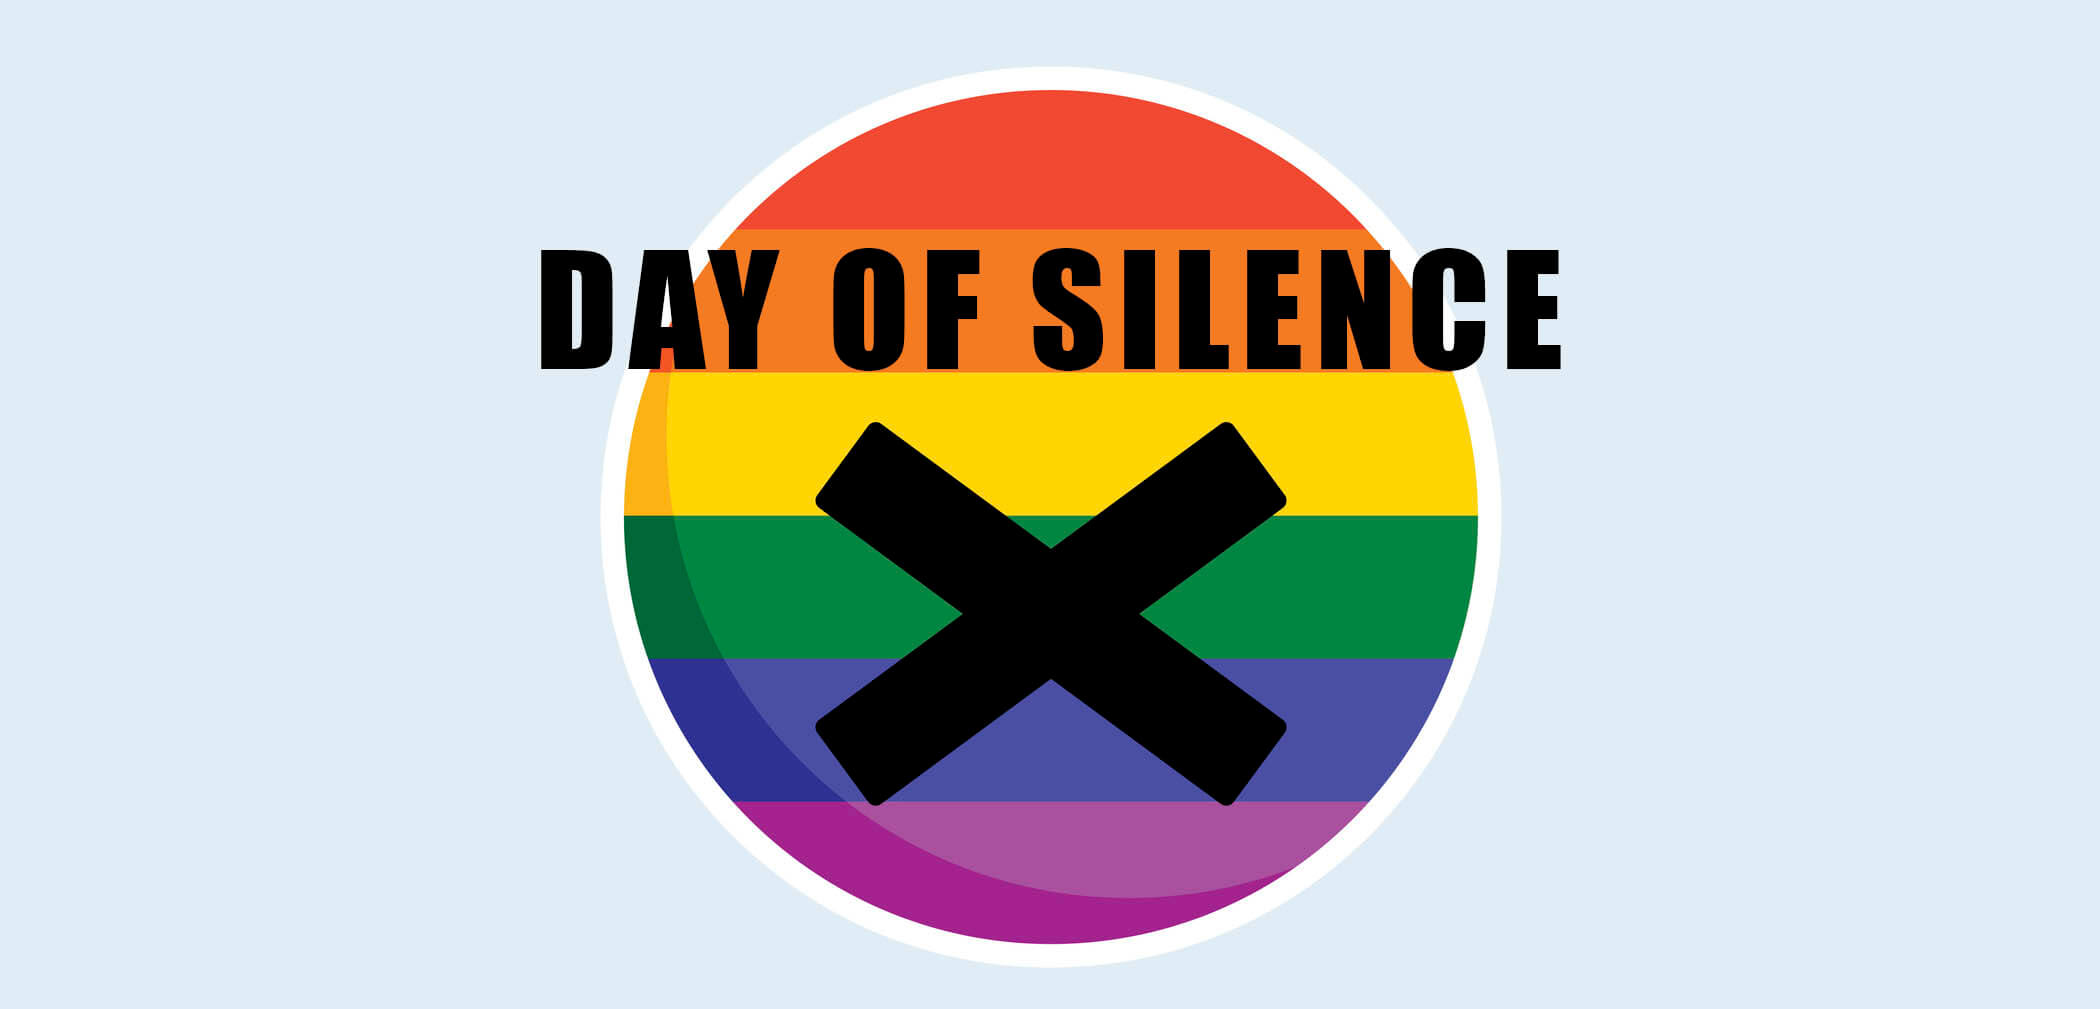 day-of-silence-leaves-lasting-message-colorado-academy-news